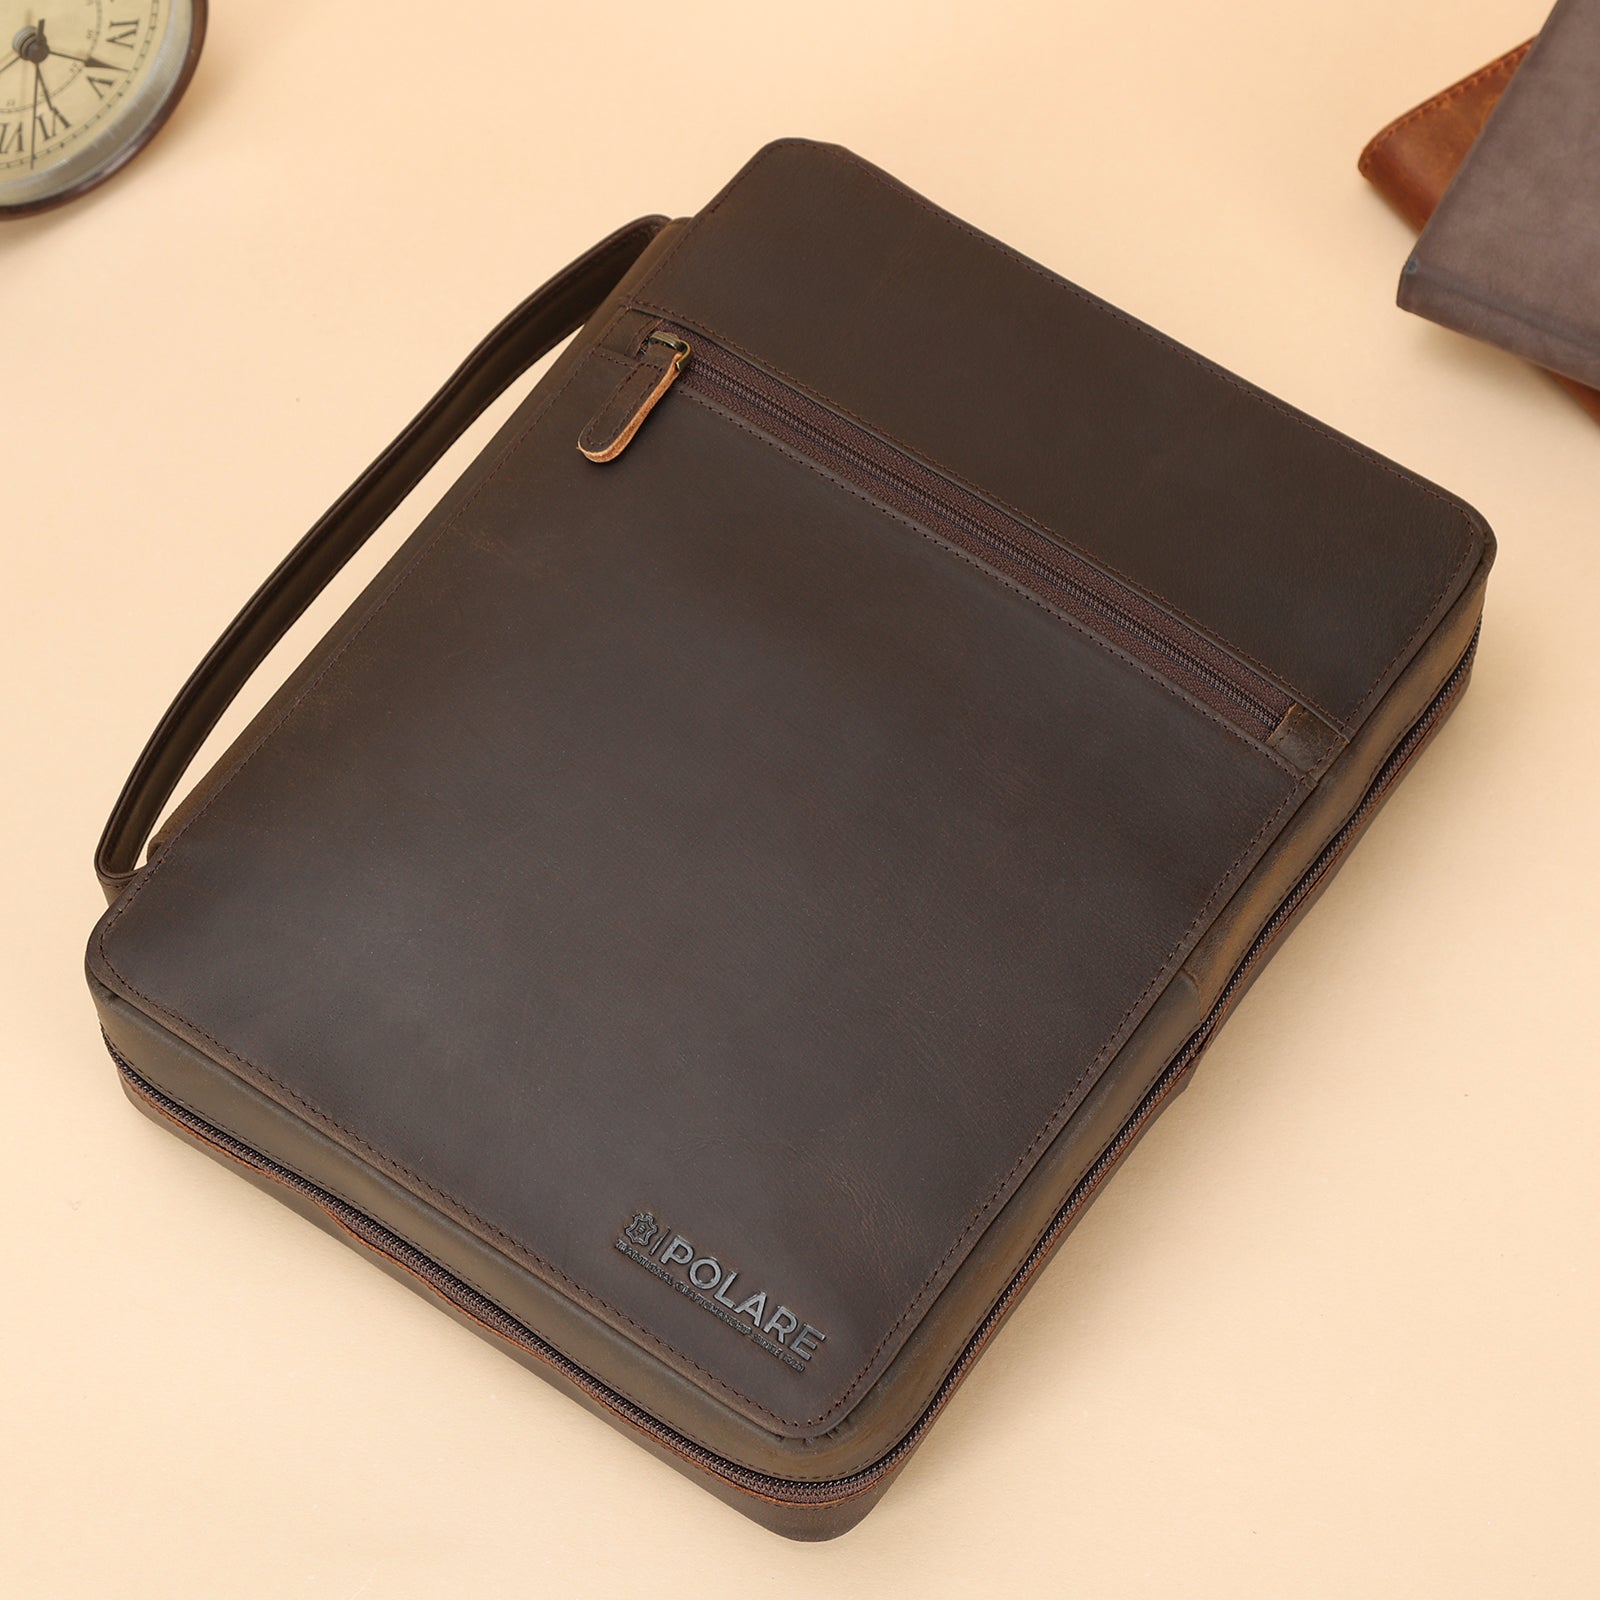 Full Grain Leather Bible Cover Book Holder Carrying Case (Scenario Shows)